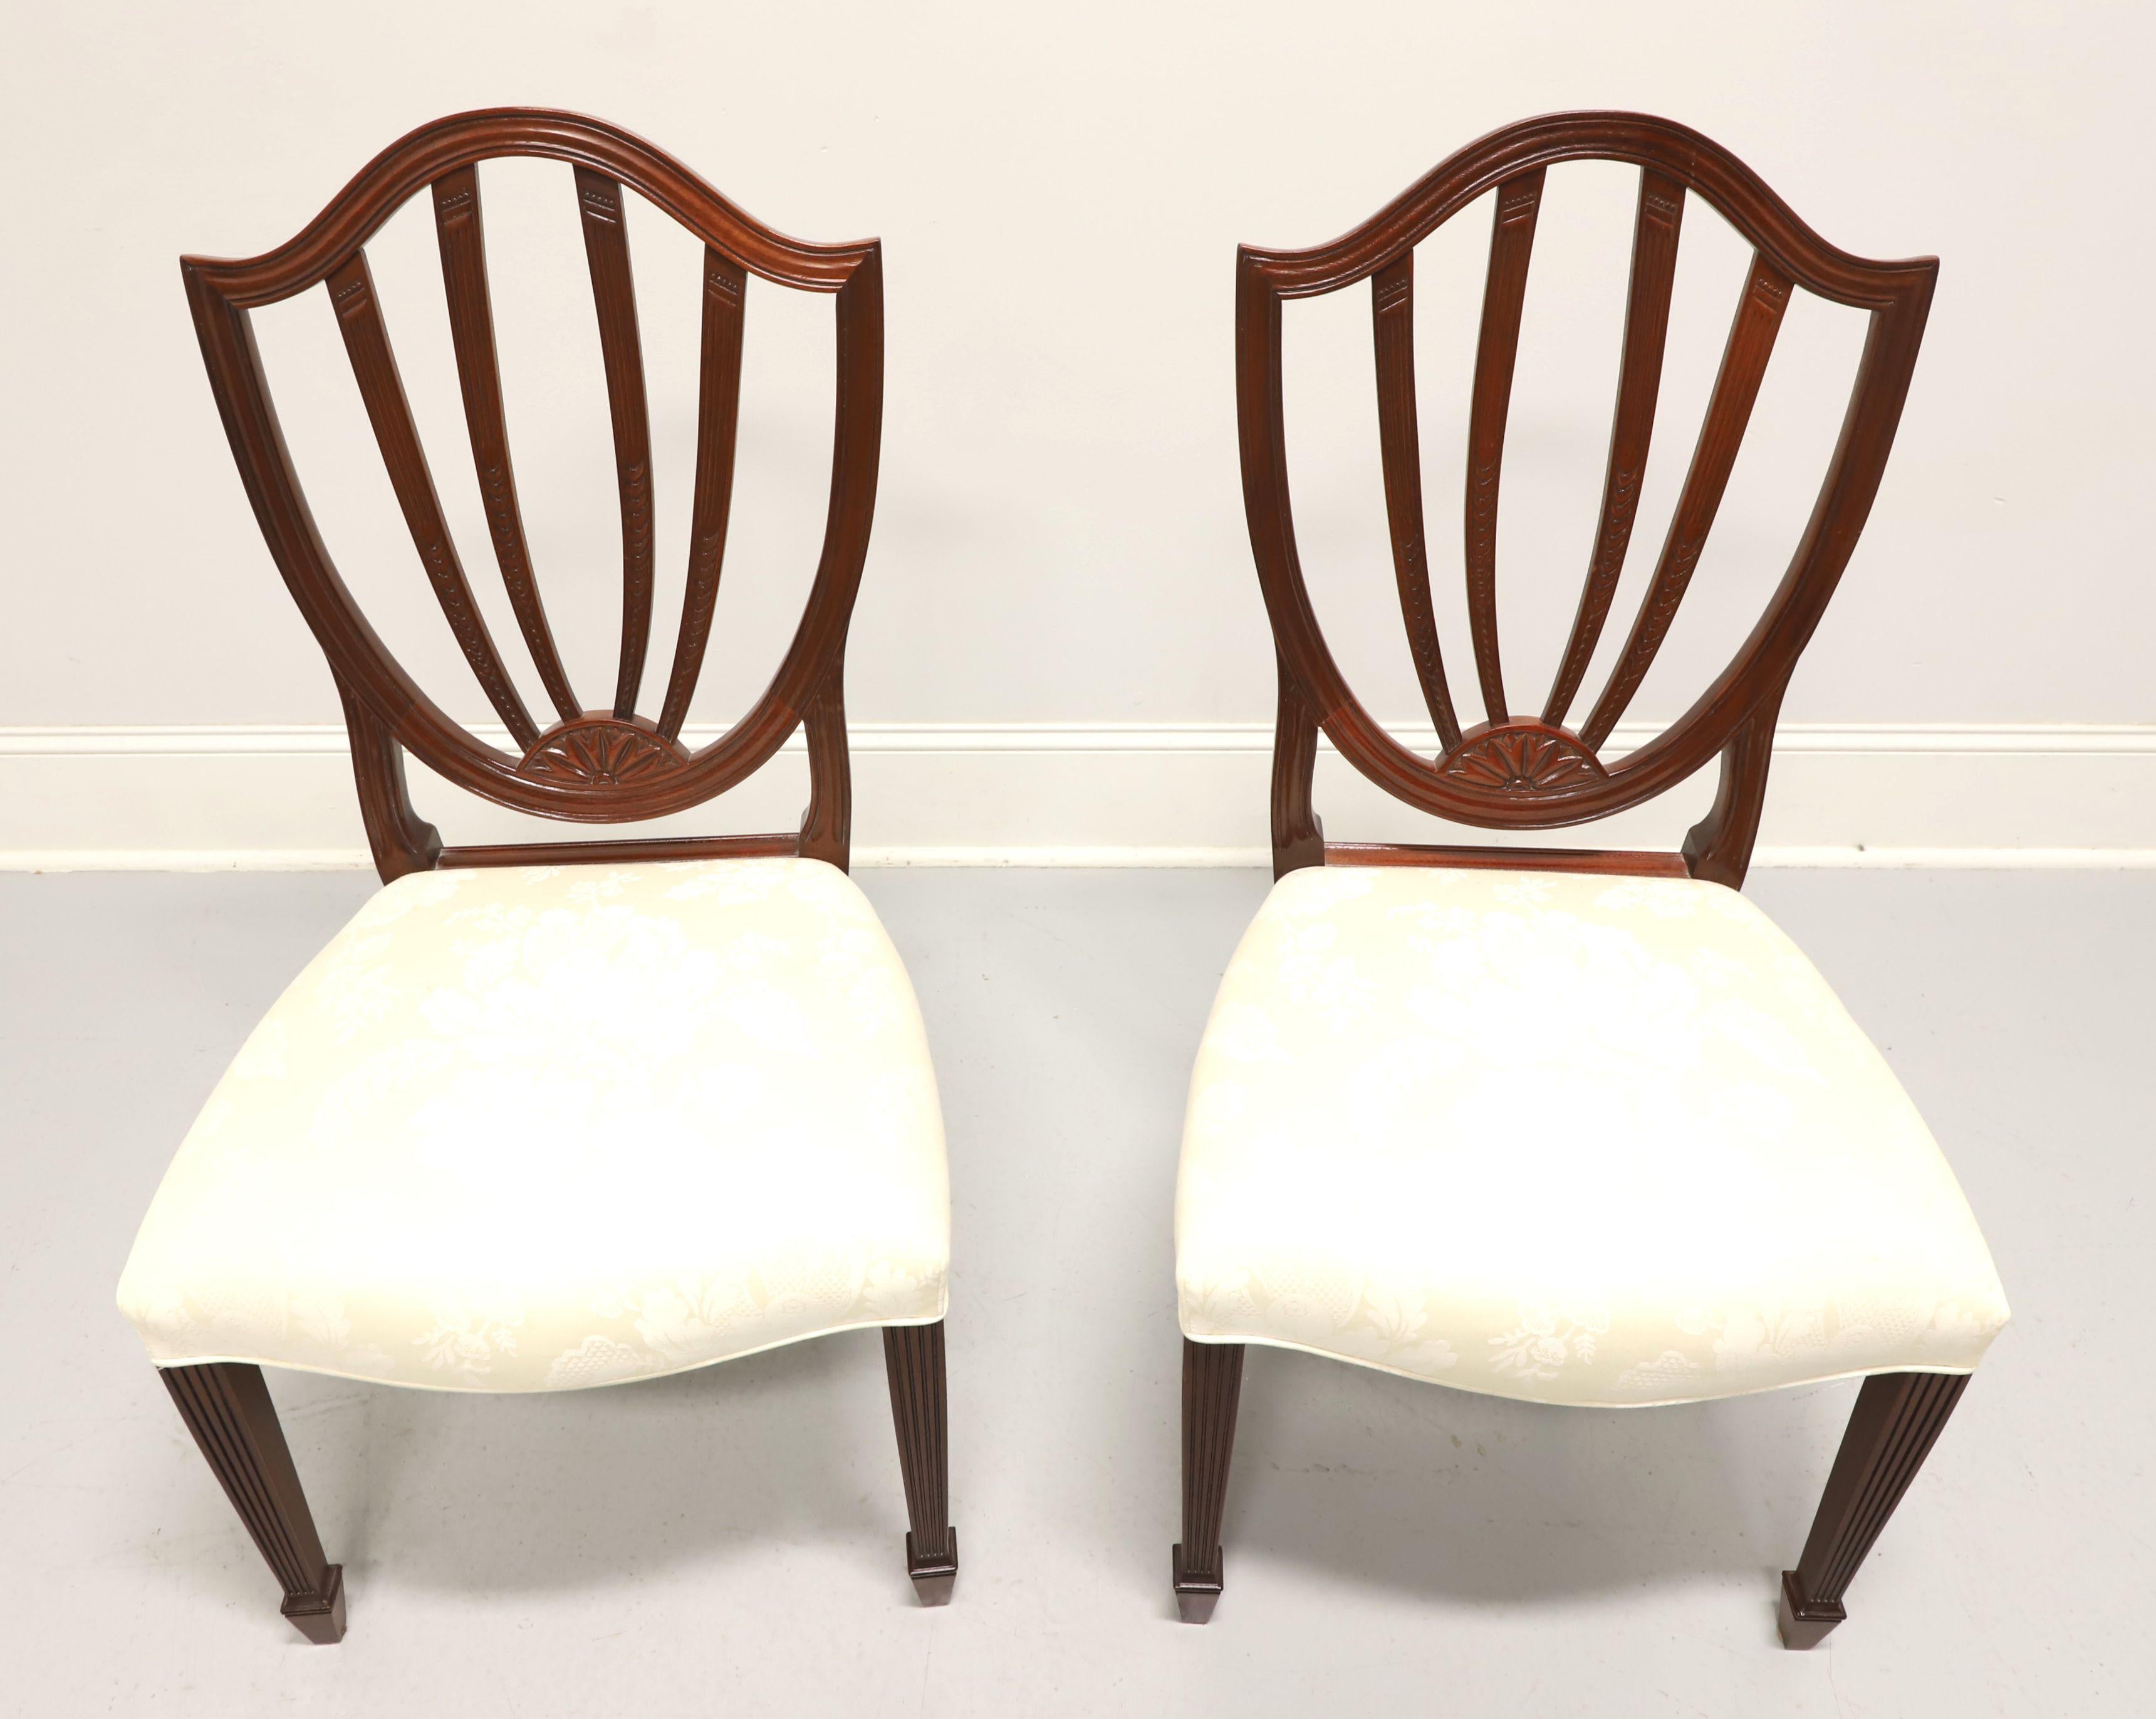 A pair of dining side chairs in the Georgian Hepplewhite style by Baker Furniture, from their Historic Charleston Reproductions Collection. Solid mahogany, carved open shield backrests with a leaf motif, cream colored brocade fabric upholstered